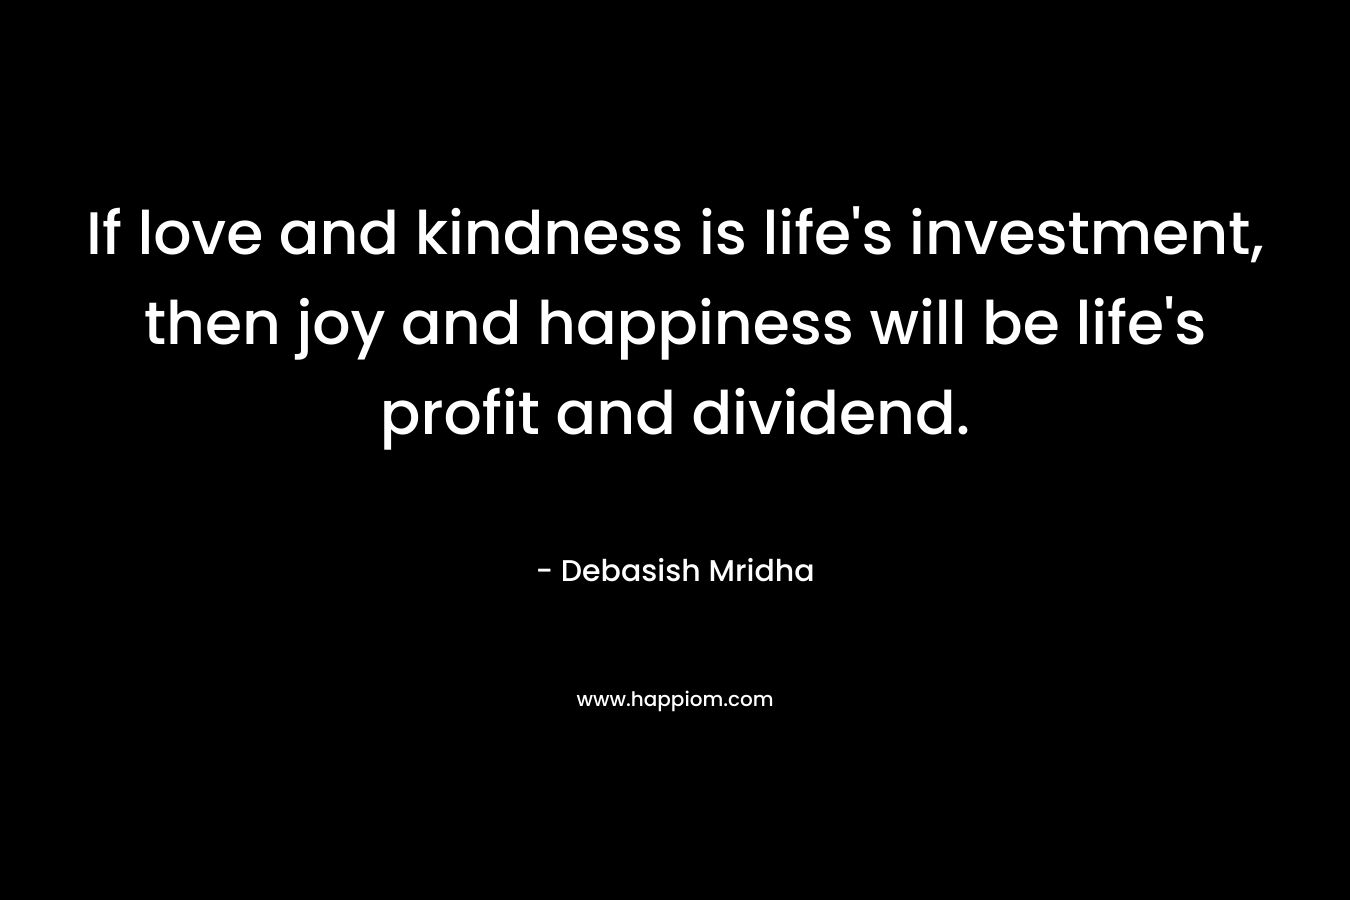 If love and kindness is life’s investment, then joy and happiness will be life’s profit and dividend. – Debasish Mridha